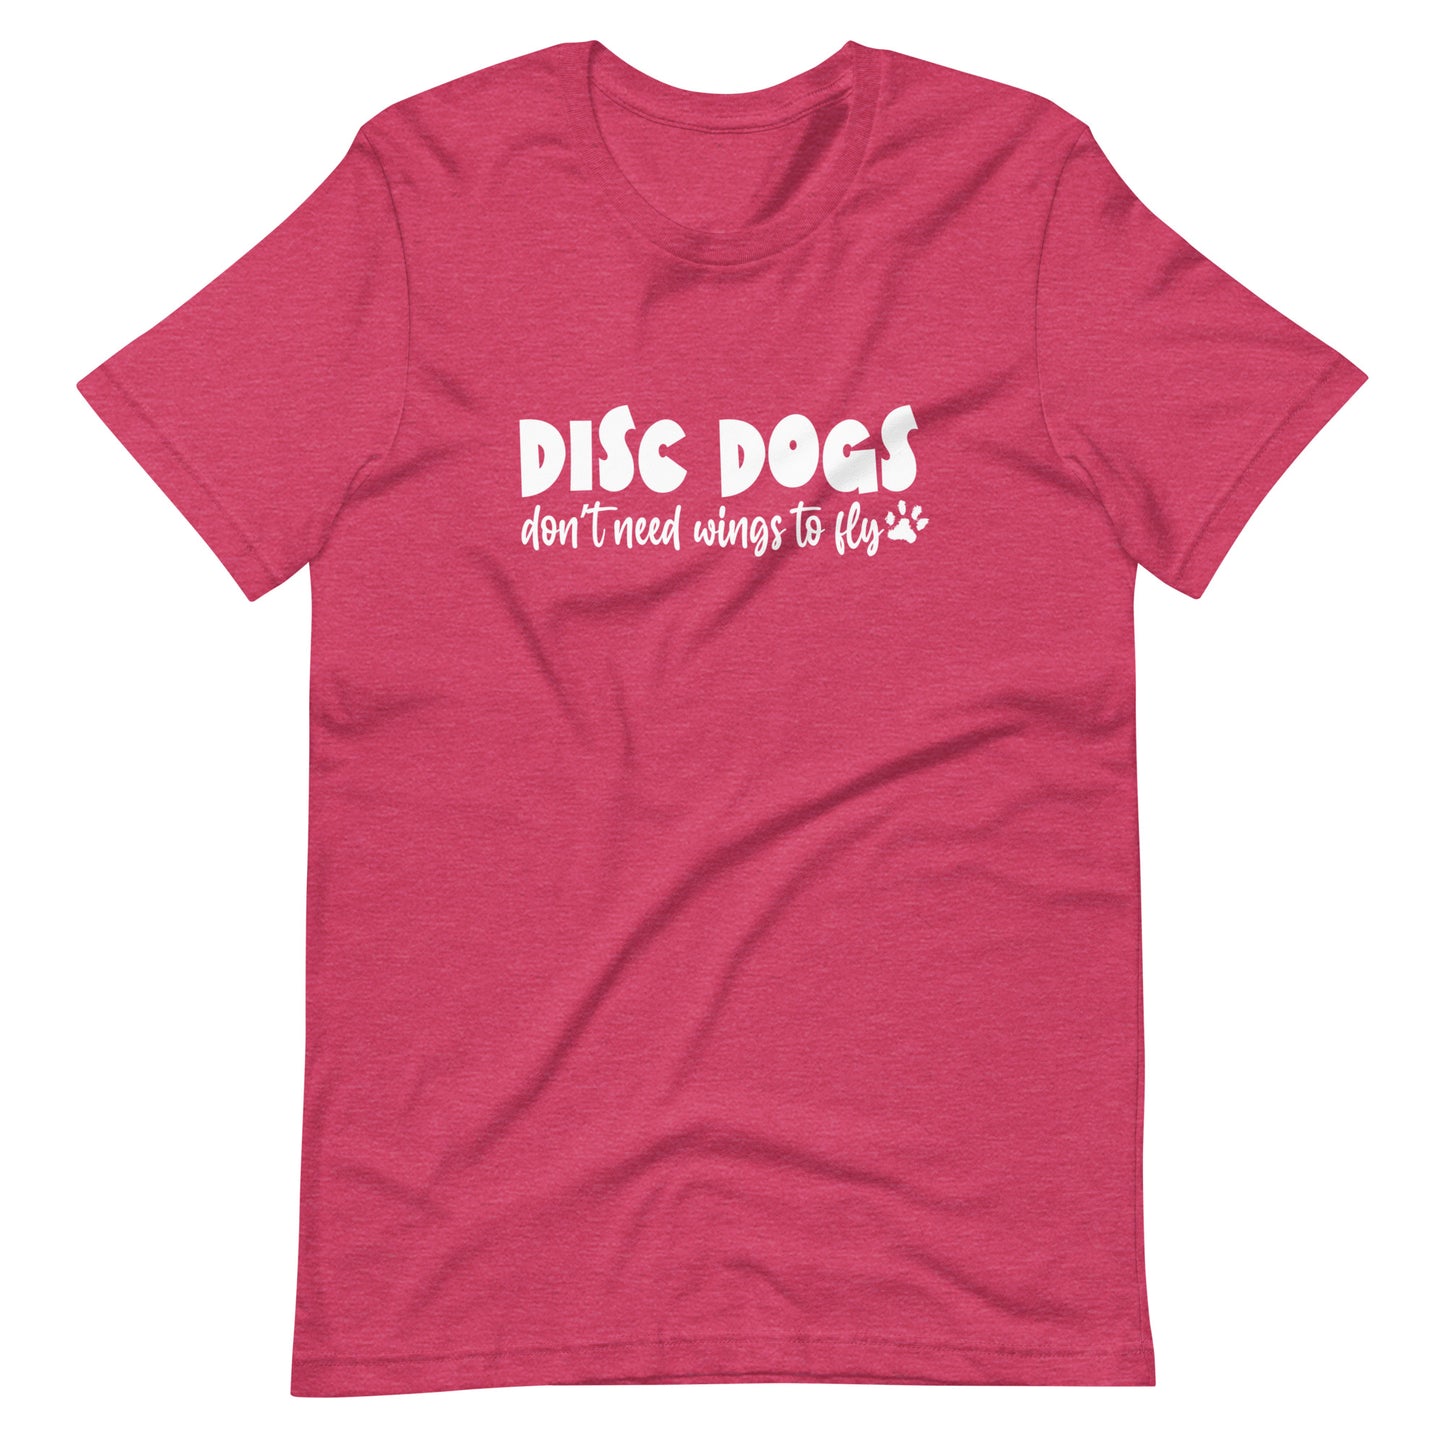 DISC DOGS don't need wings to fly - Unisex t-shirt